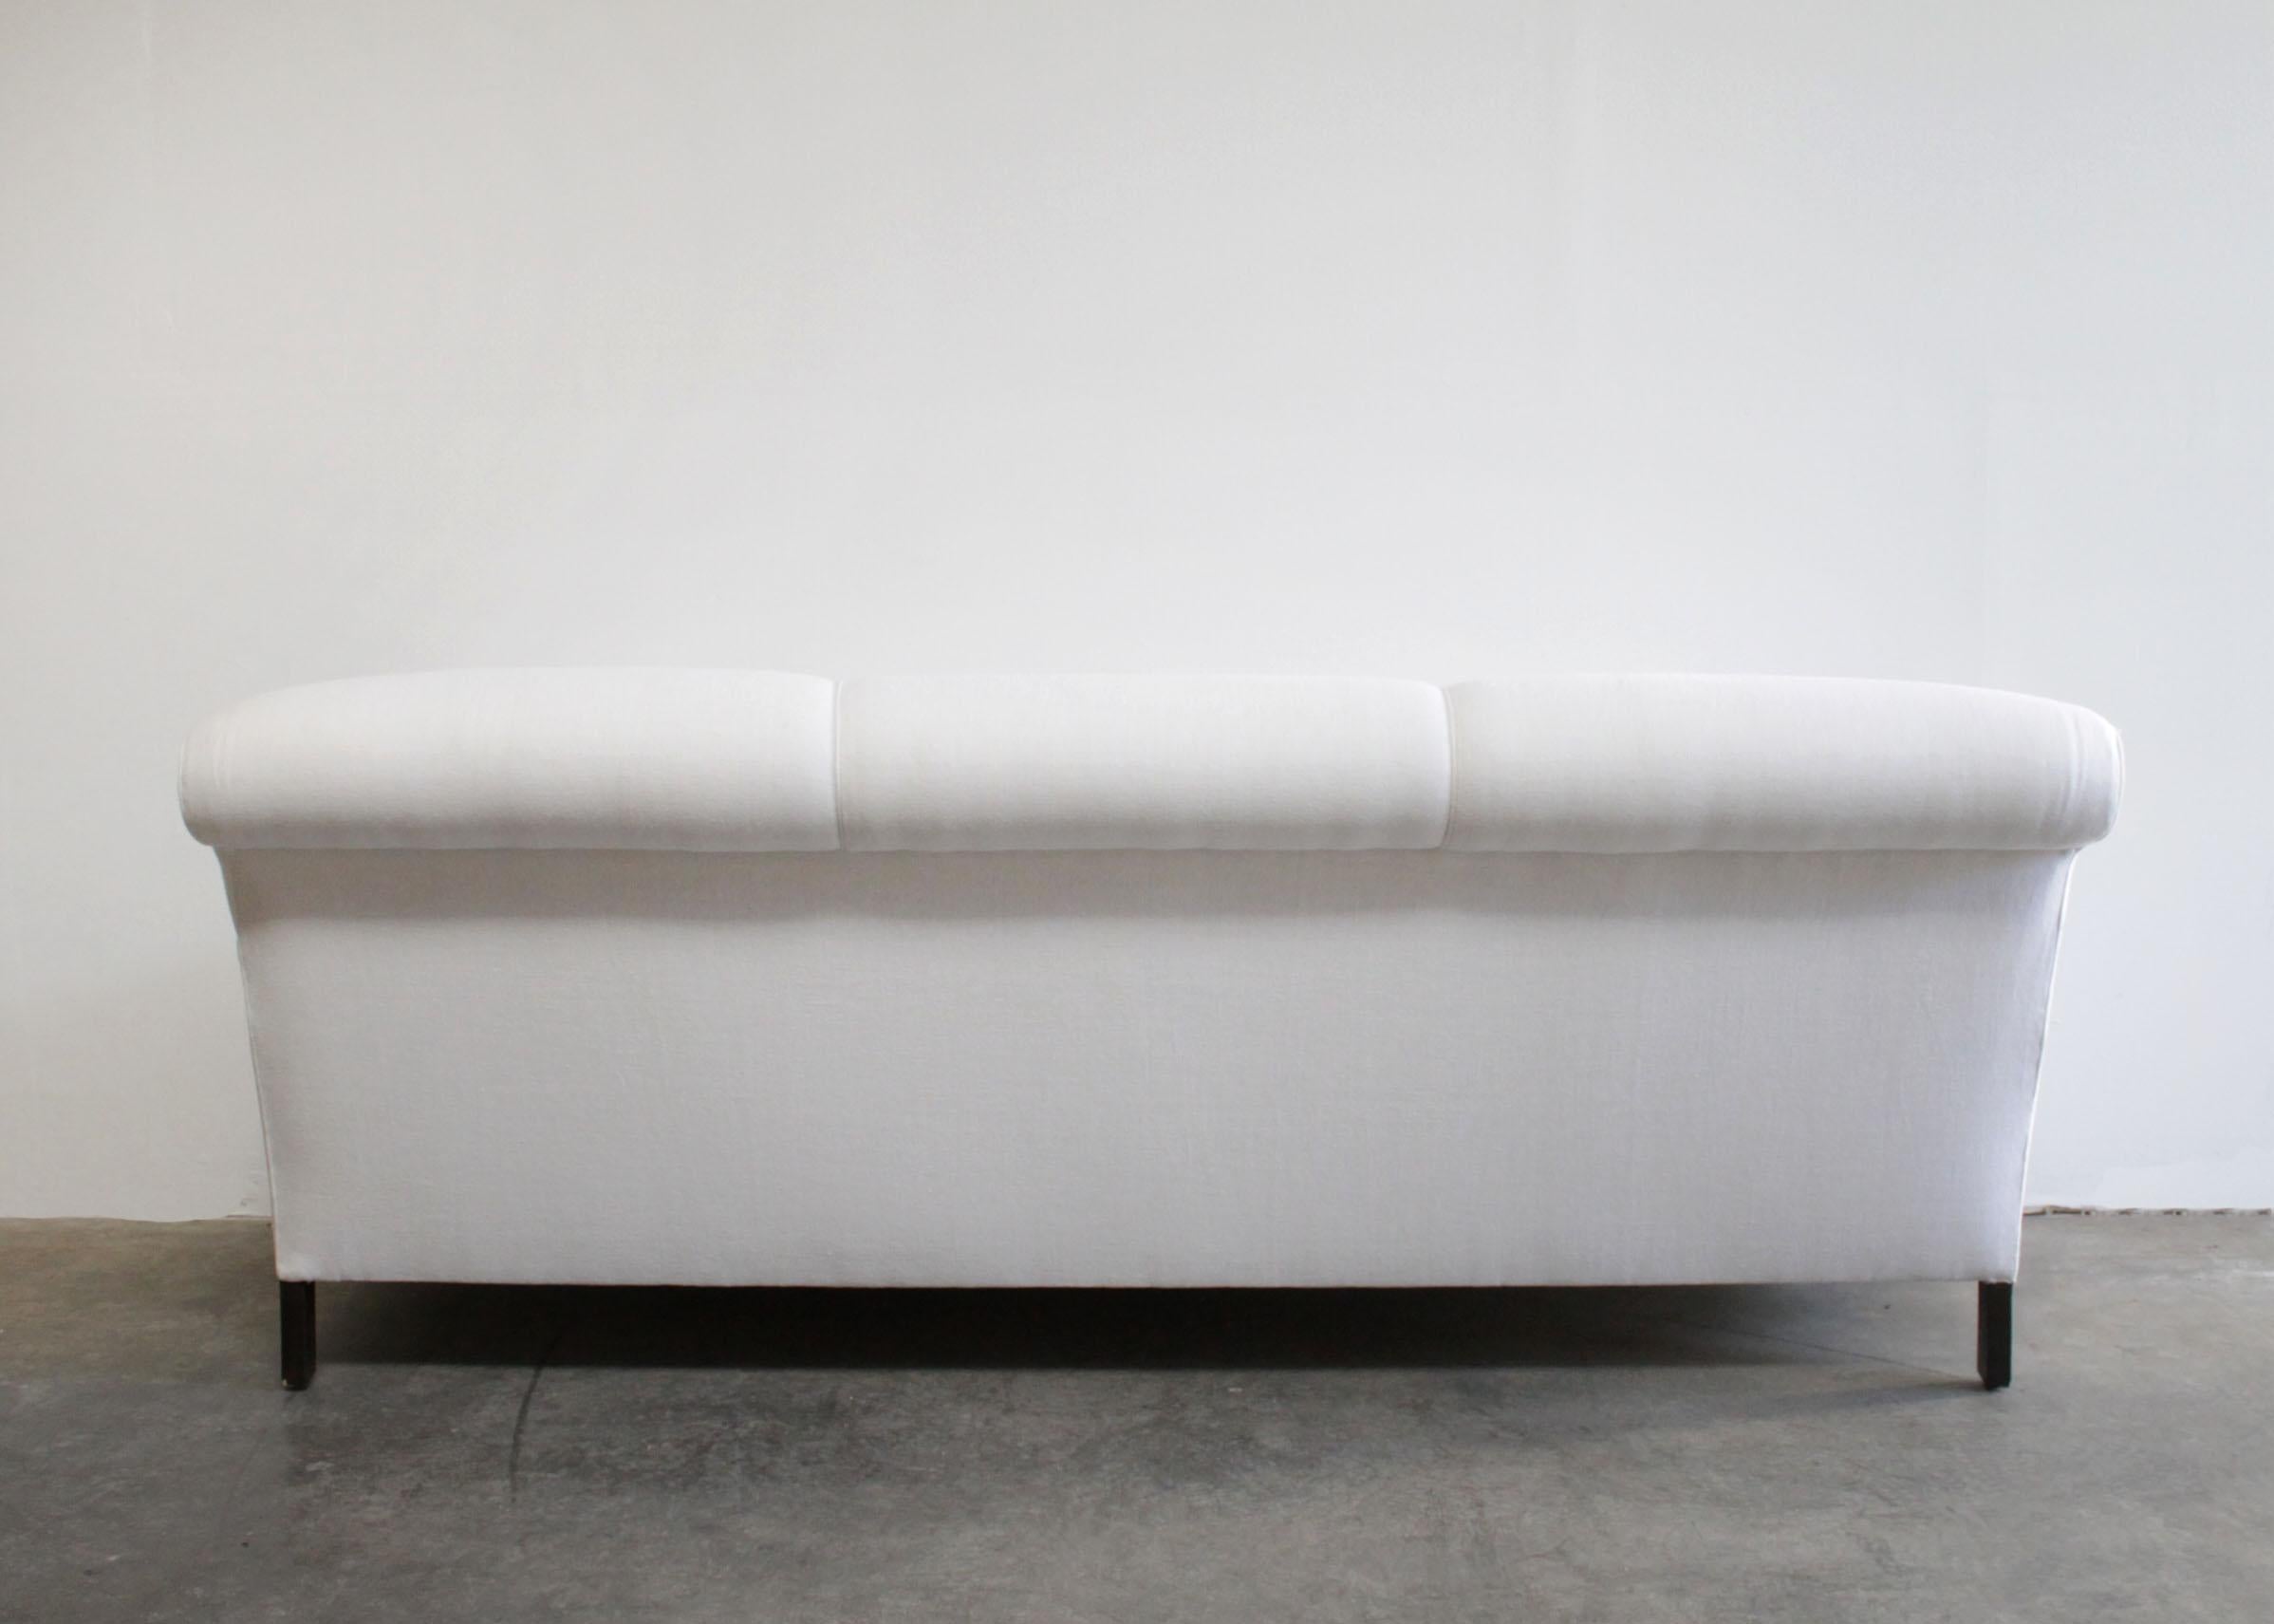 Custom Made White Linen English Arm Rolled Back Sofa with Casters In New Condition For Sale In Brea, CA